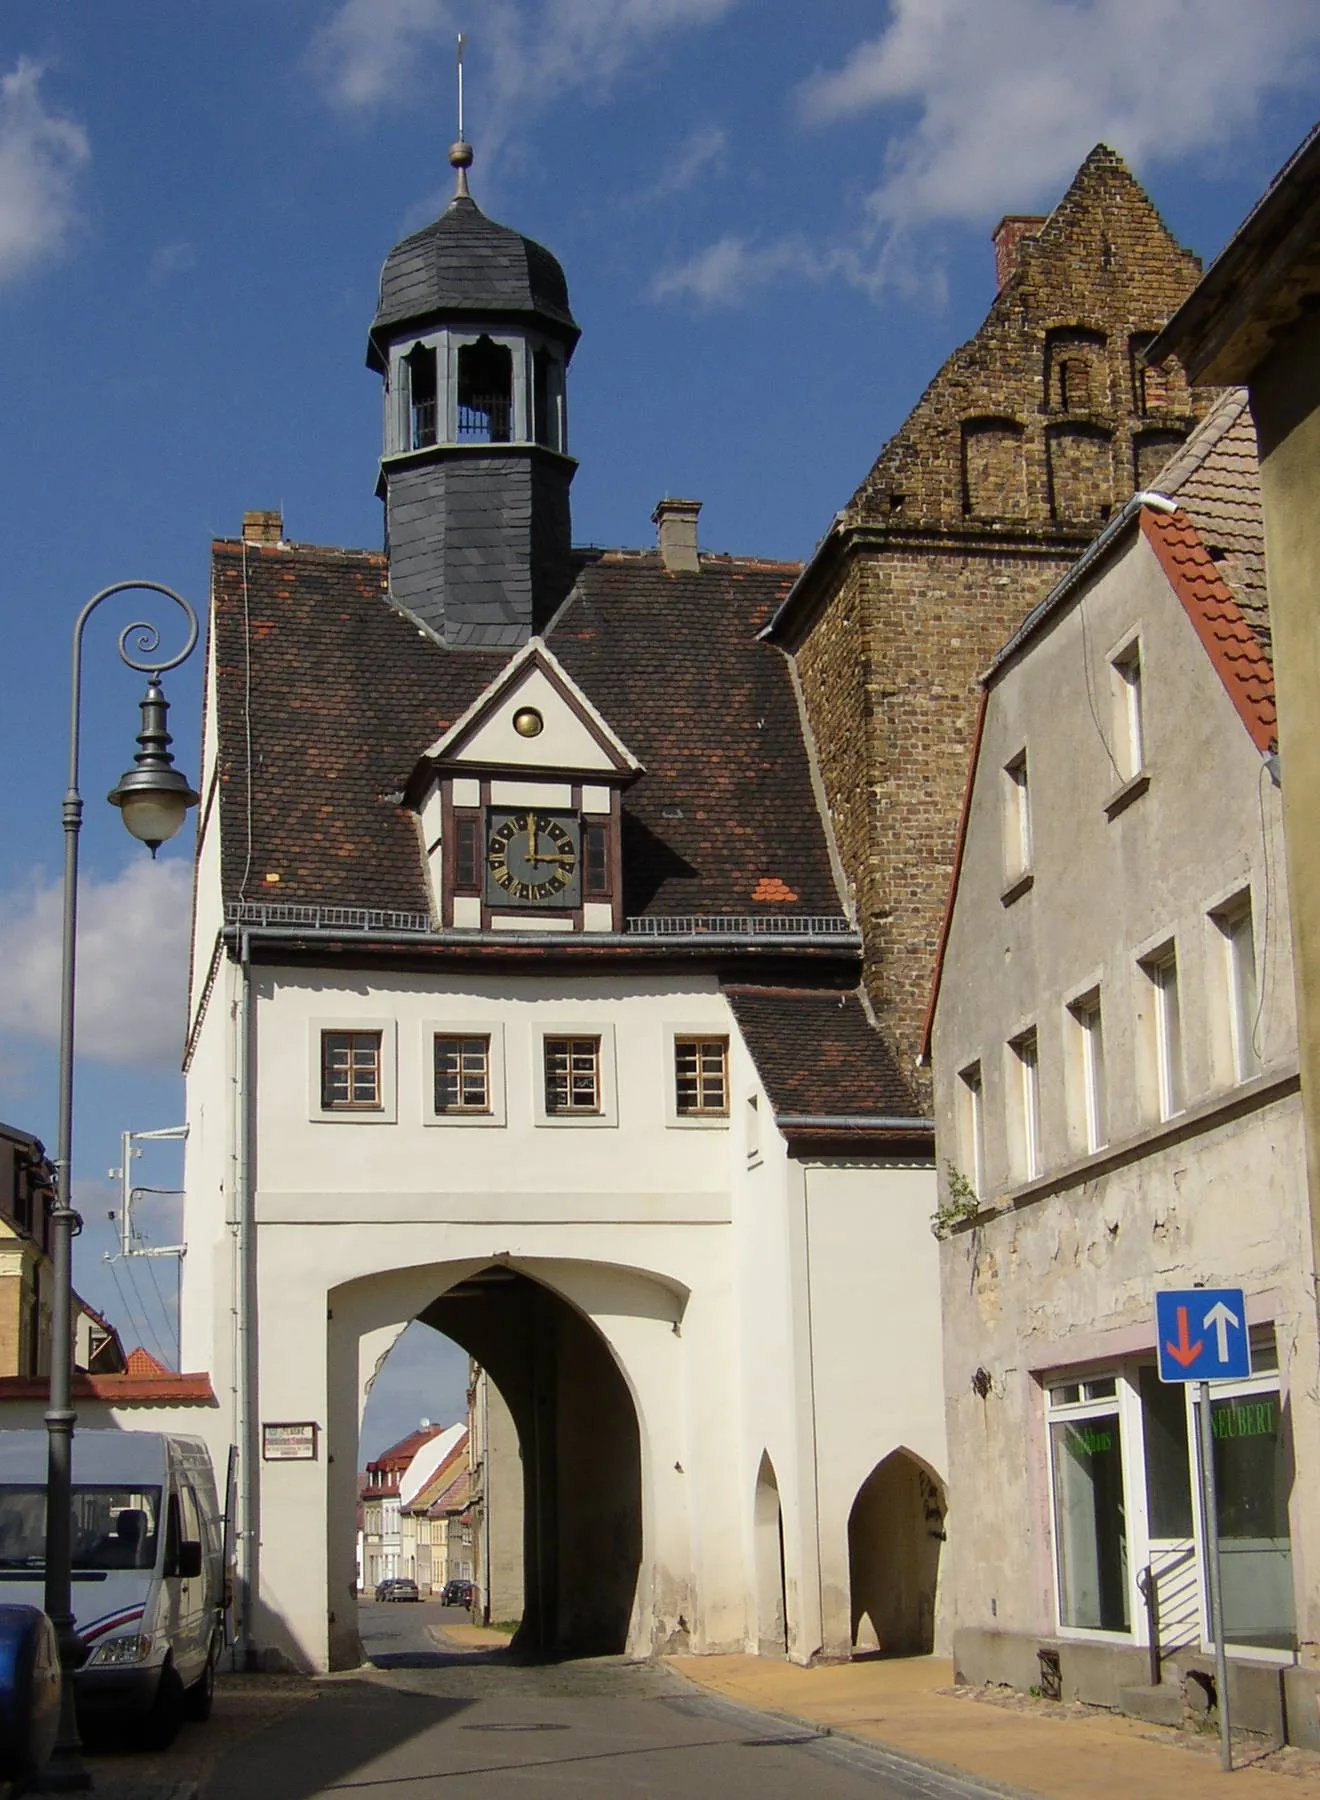 Photo showing: Town gate in Bad Schmiedeberg in Saxony-Anhalt, Germany